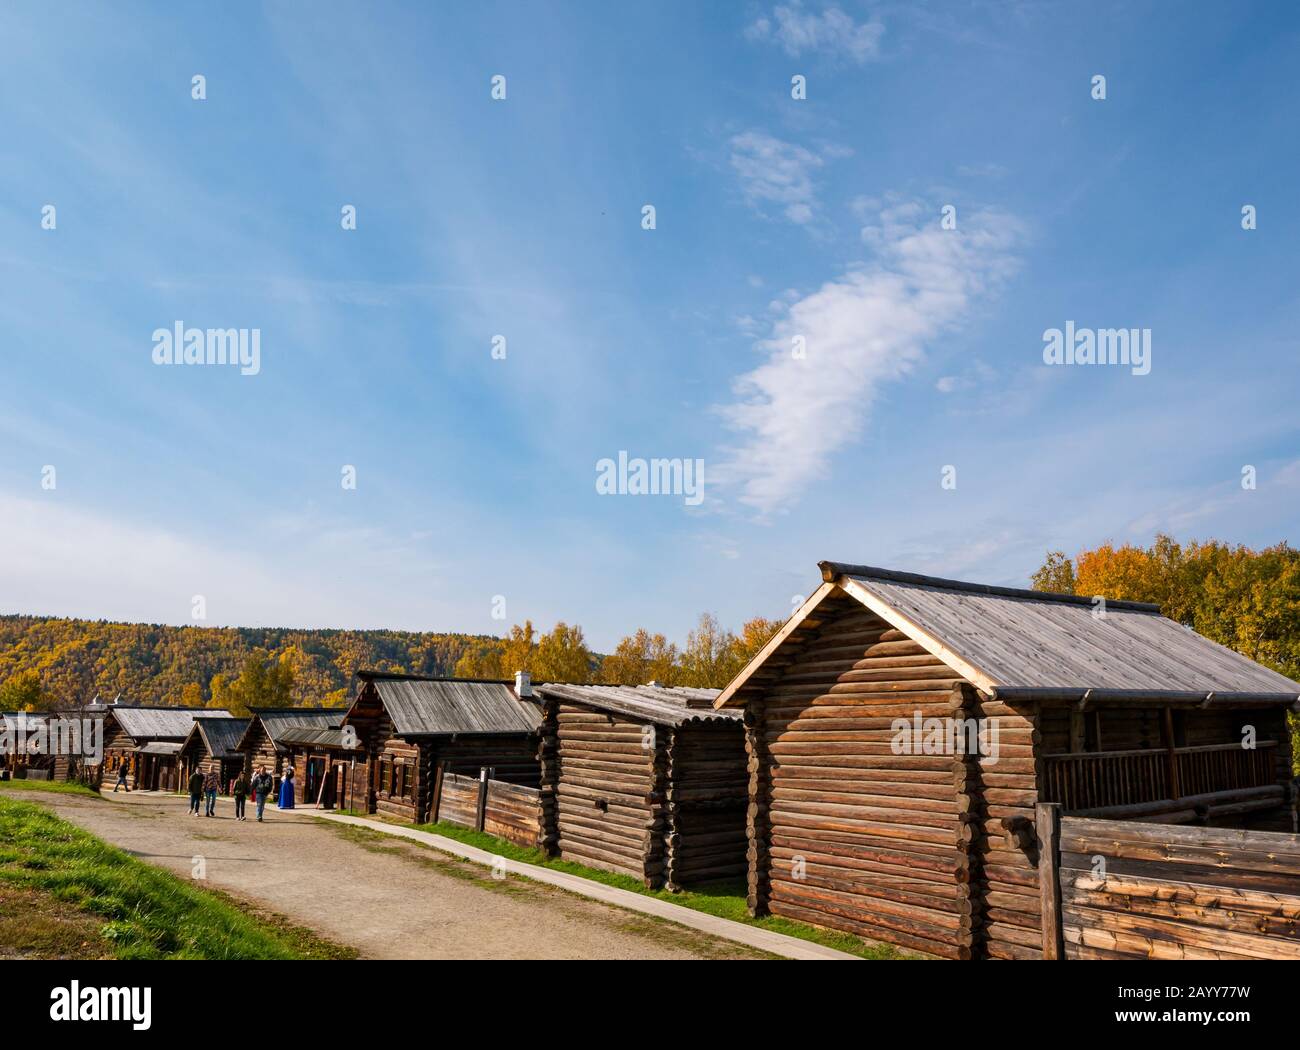 Old fashioned traditional style wooden log houses or cabins, Taltsy Museum of Wooden Architecture, Irkutsk Region, Siberia, Russia Stock Photo